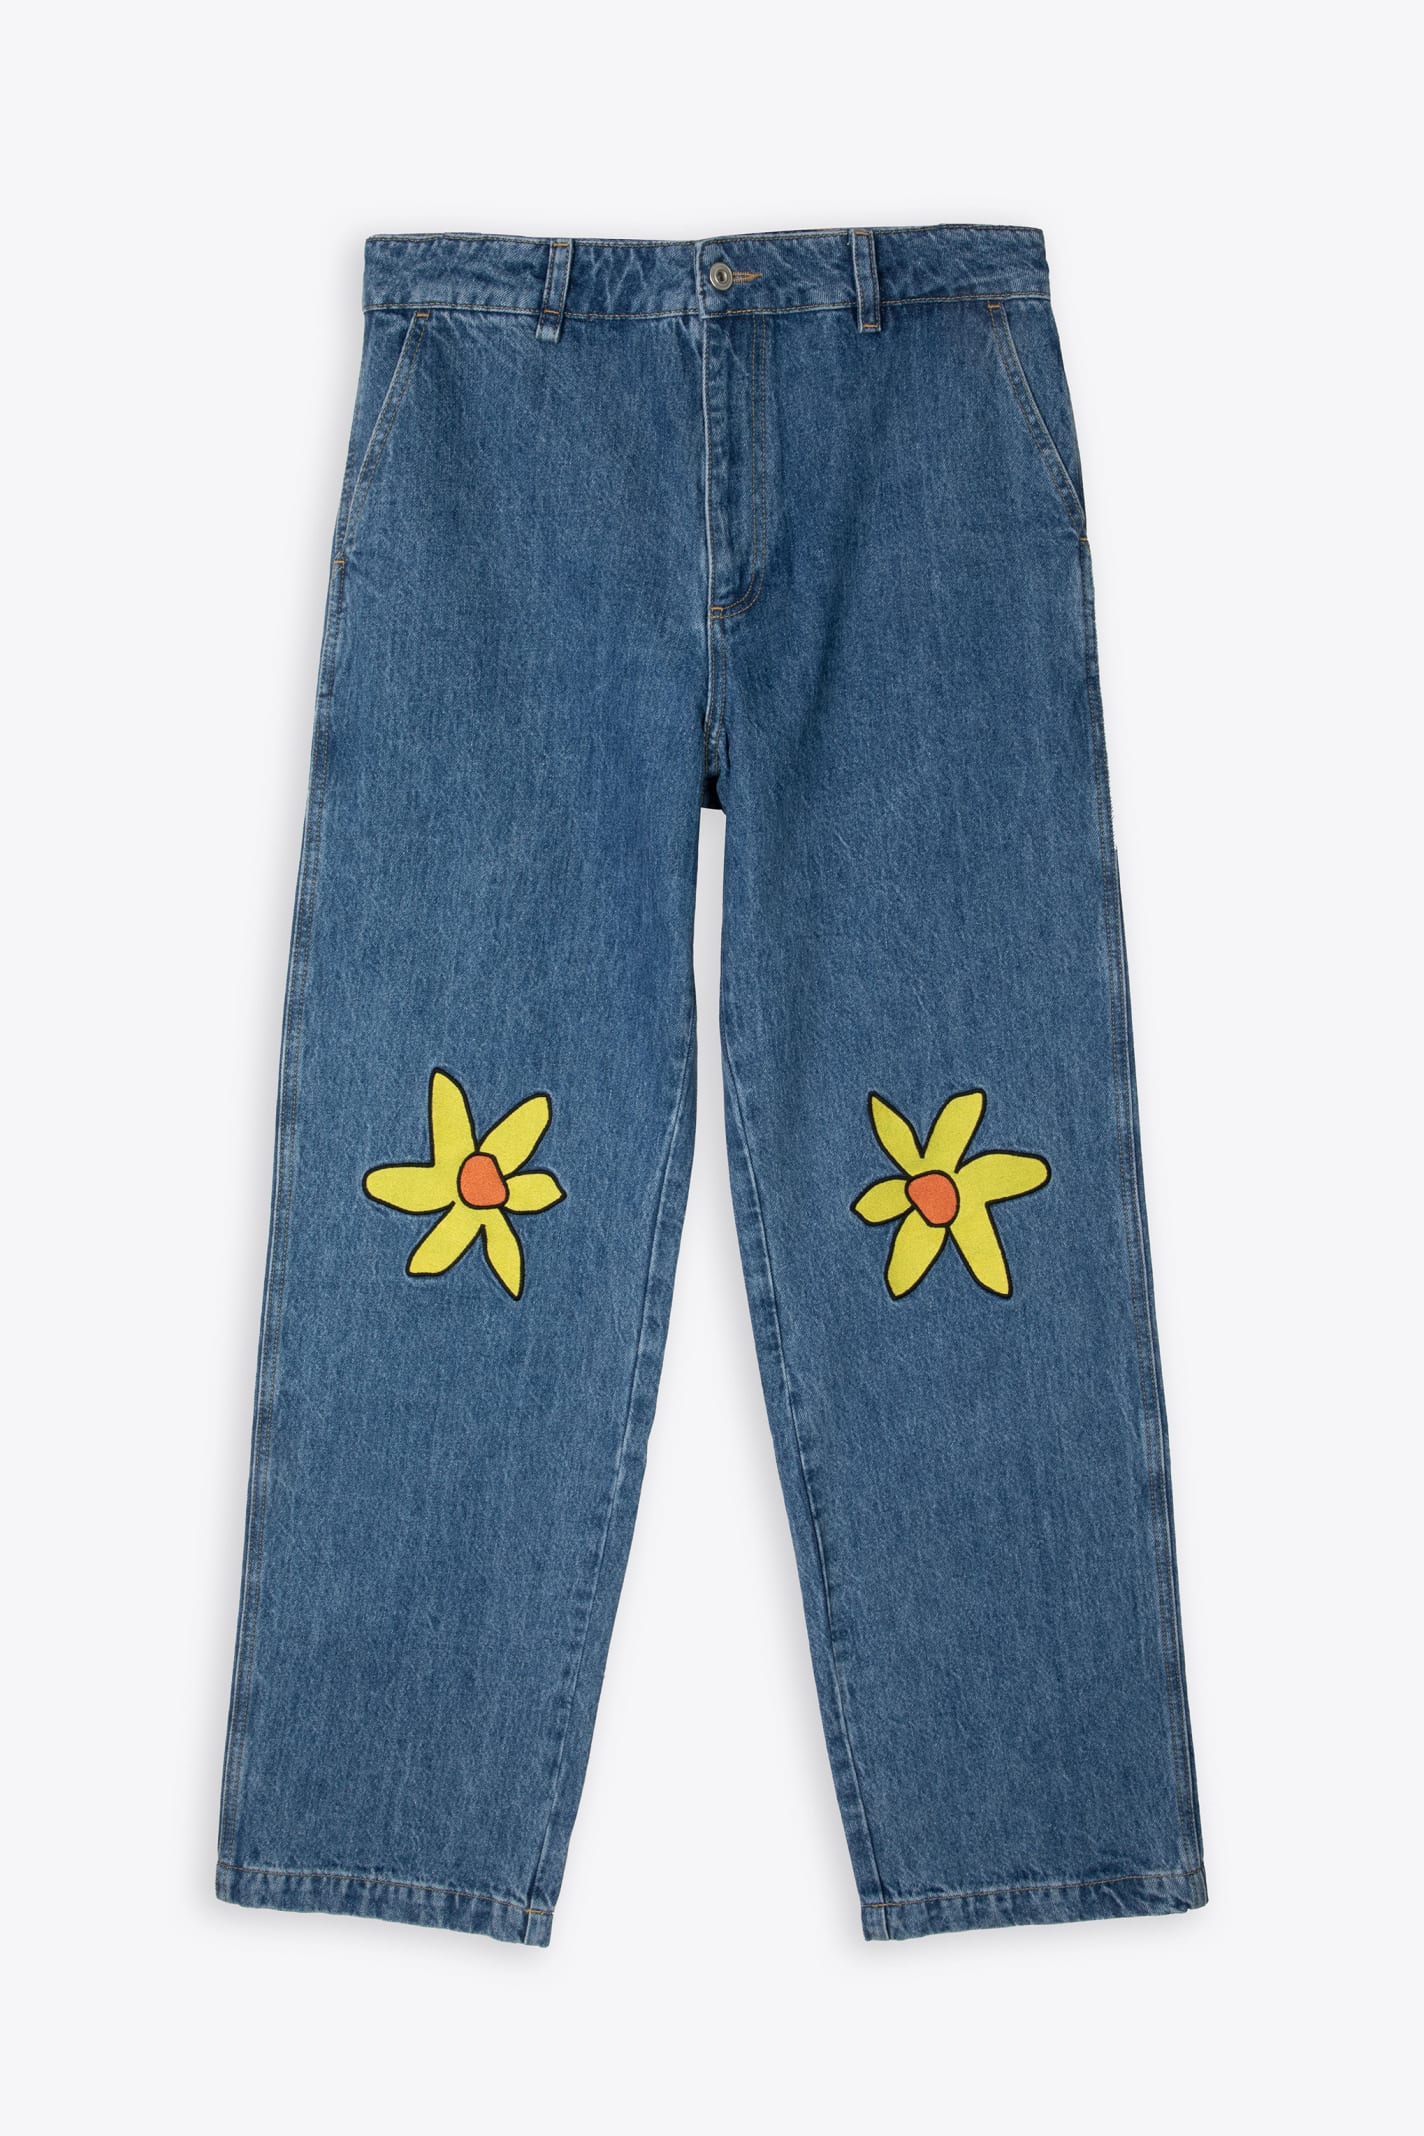 Axel Arigato Mellow Embroidered Jeans Baggy blue jeans with daisy embroidered patches - Mellow embroidered jeans